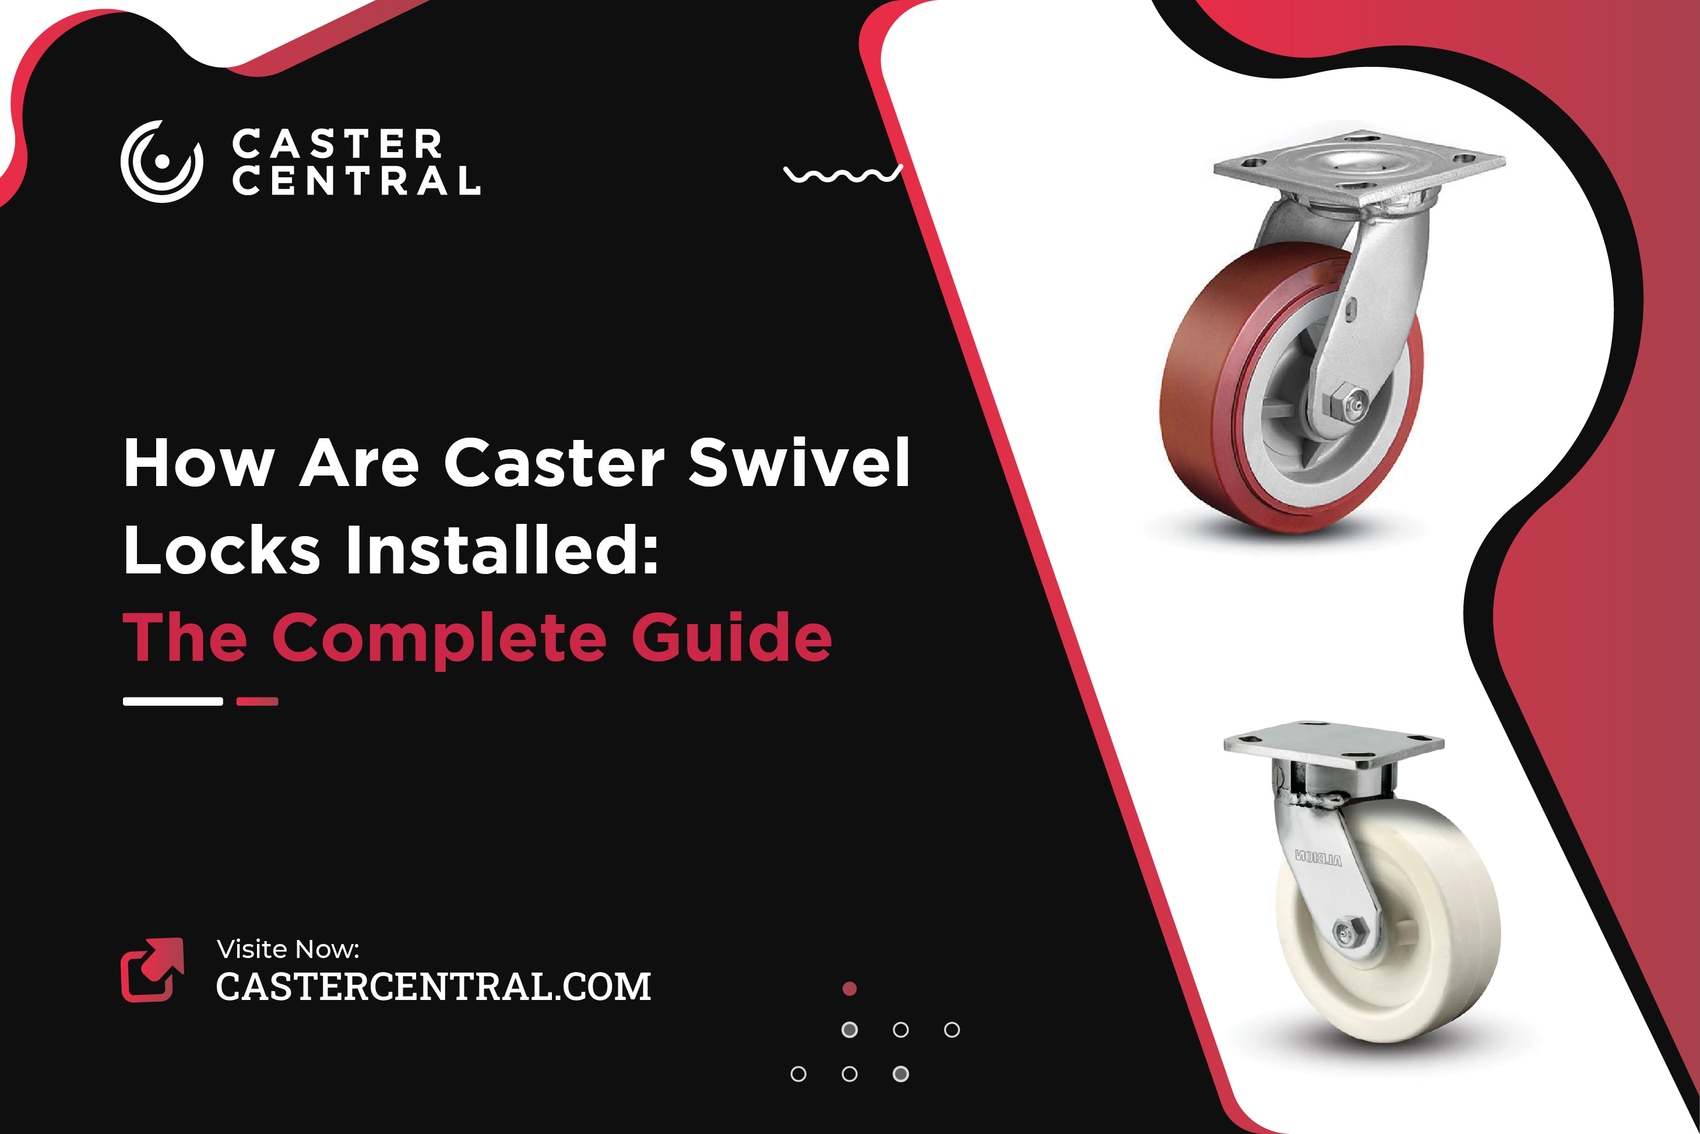 How Are Caster Swivel Locks Installed: The Complete Guide